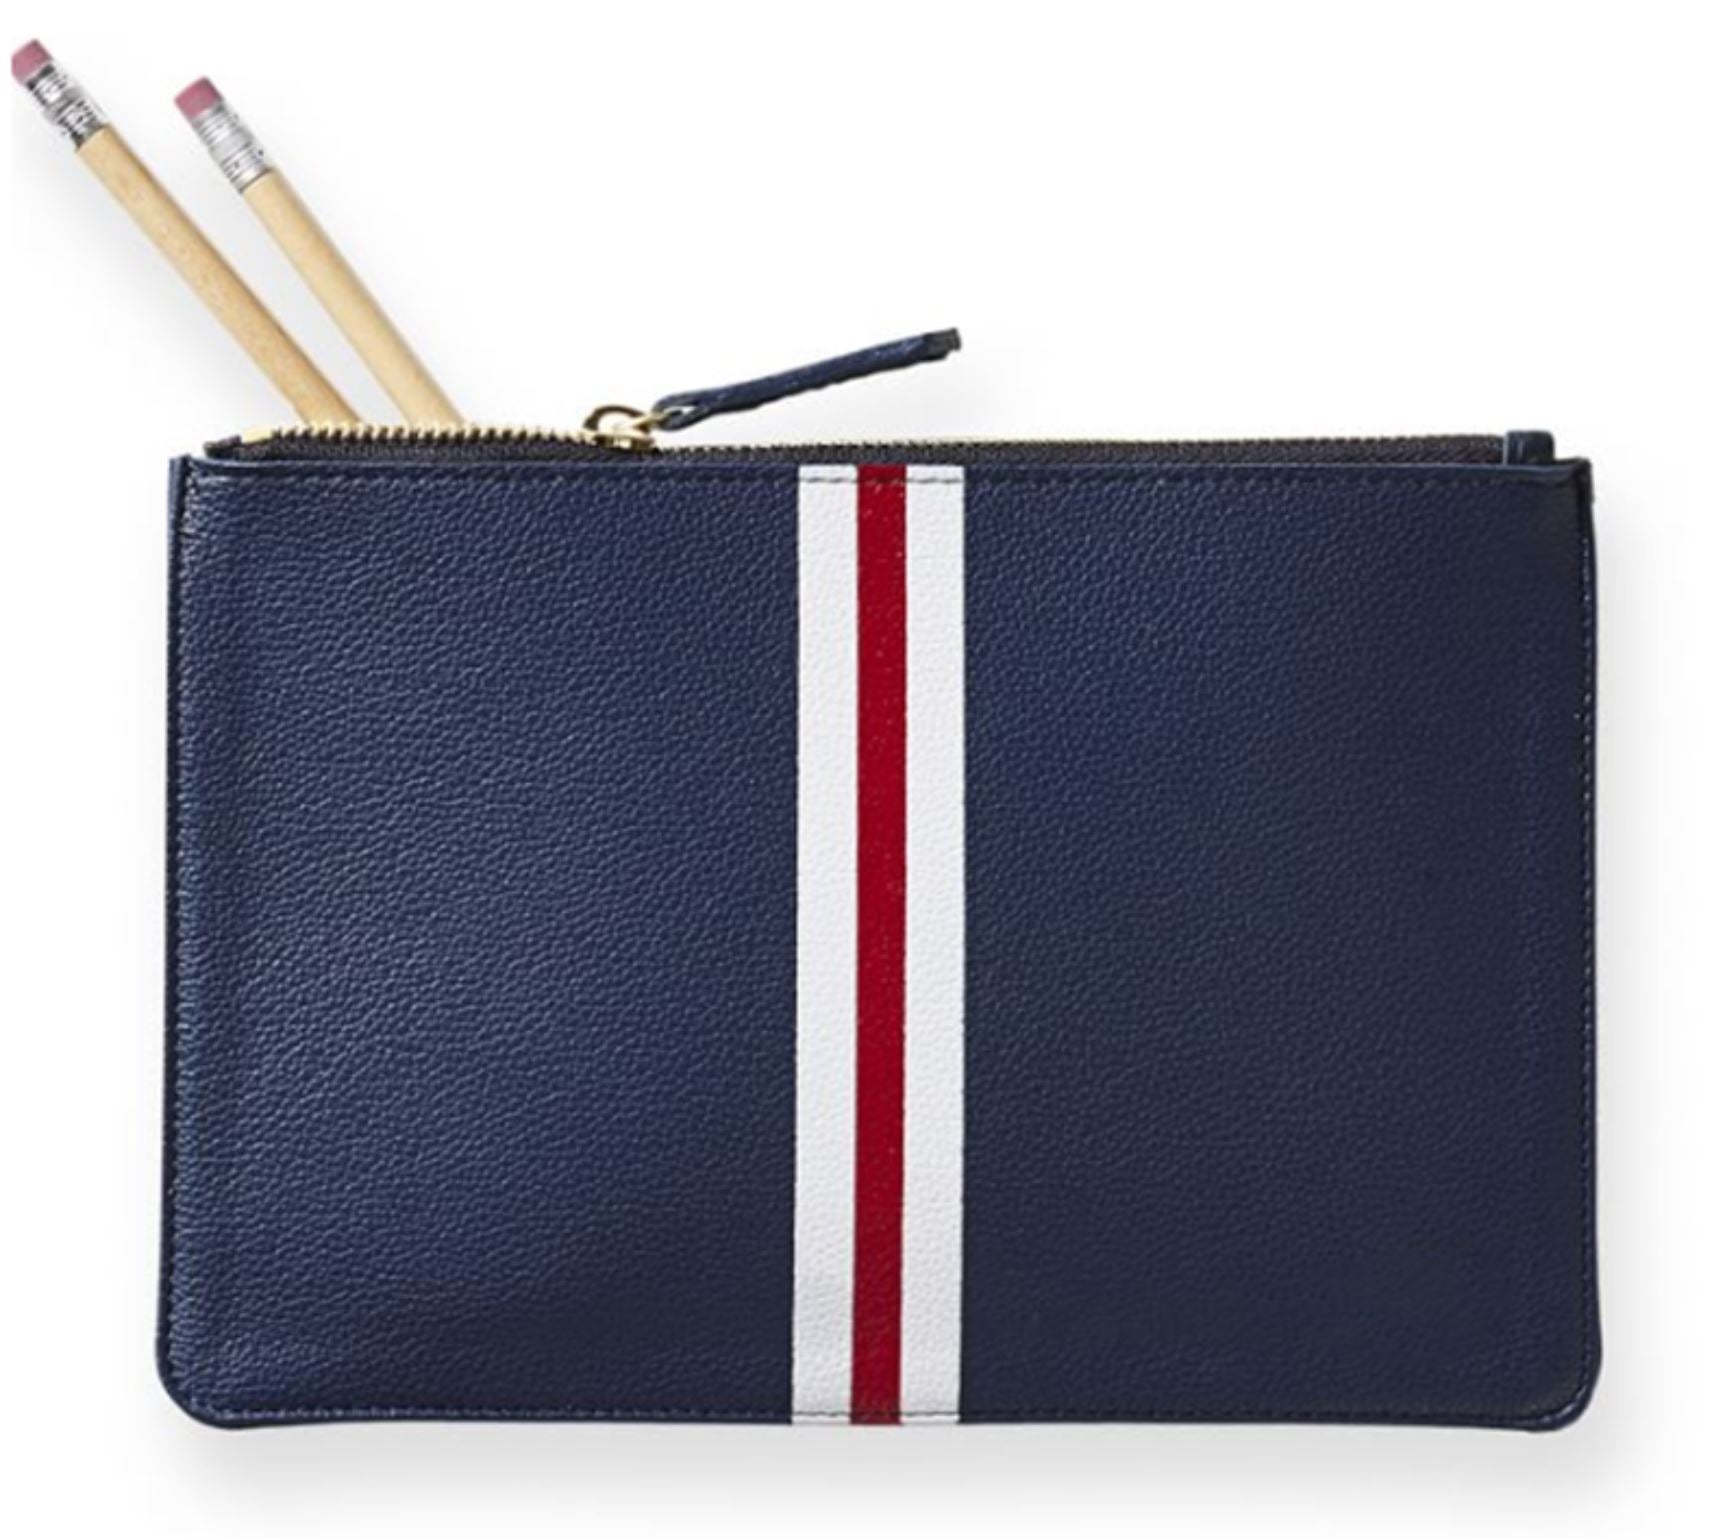 Sloane Leather Clutch - Navy